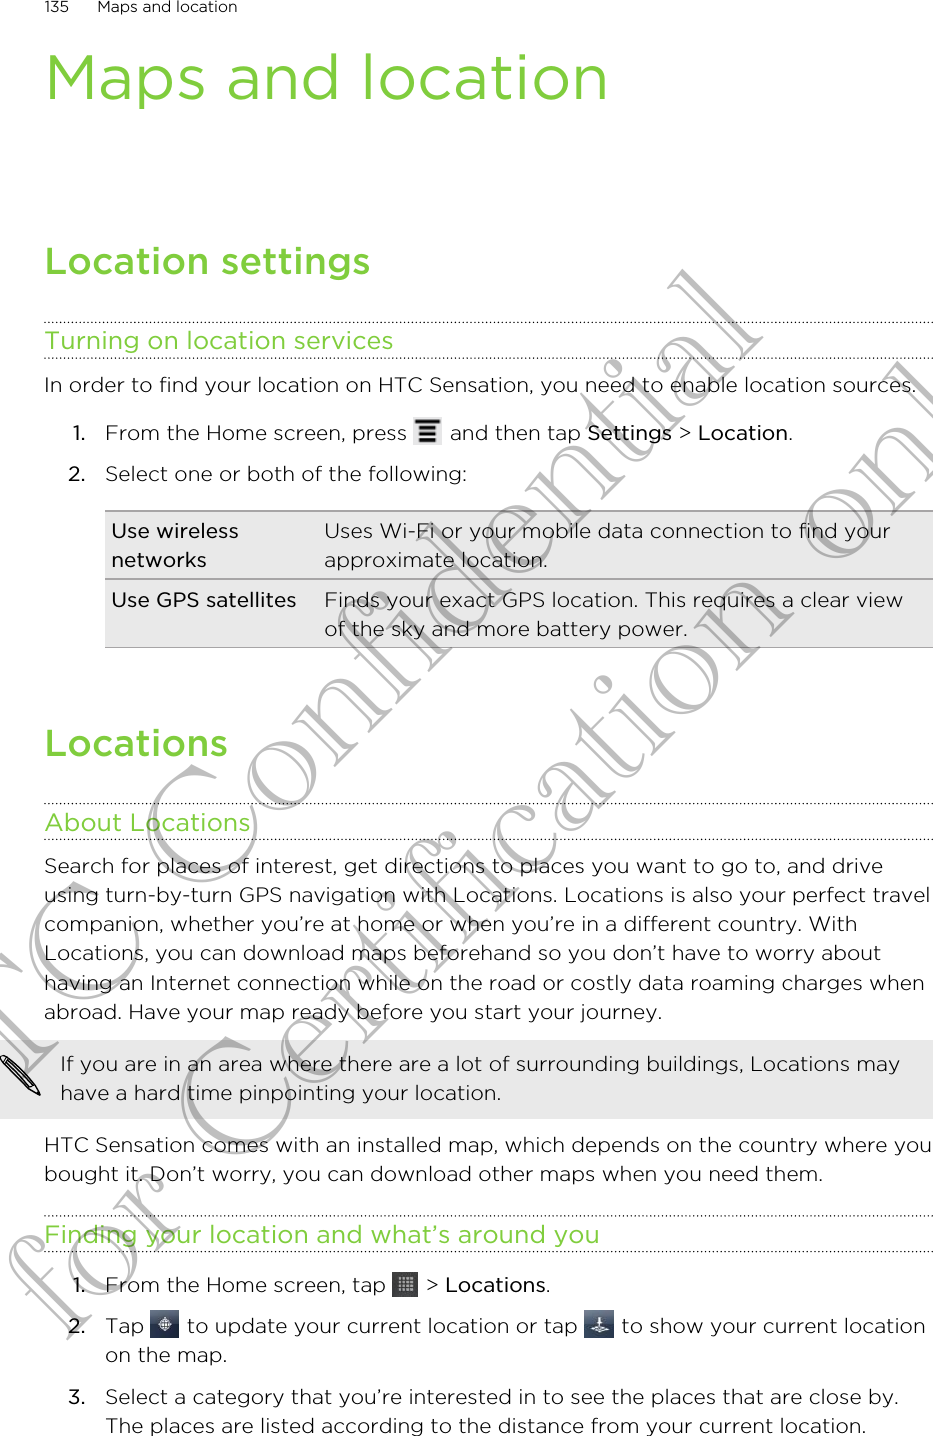 Maps and locationLocation settingsTurning on location servicesIn order to find your location on HTC Sensation, you need to enable location sources.1. From the Home screen, press   and then tap Settings &gt; Location.2. Select one or both of the following:Use wirelessnetworksUses Wi-Fi or your mobile data connection to find yourapproximate location.Use GPS satellites Finds your exact GPS location. This requires a clear viewof the sky and more battery power.LocationsAbout LocationsSearch for places of interest, get directions to places you want to go to, and driveusing turn-by-turn GPS navigation with Locations. Locations is also your perfect travelcompanion, whether you’re at home or when you’re in a different country. WithLocations, you can download maps beforehand so you don’t have to worry abouthaving an Internet connection while on the road or costly data roaming charges whenabroad. Have your map ready before you start your journey.If you are in an area where there are a lot of surrounding buildings, Locations mayhave a hard time pinpointing your location.HTC Sensation comes with an installed map, which depends on the country where youbought it. Don’t worry, you can download other maps when you need them.Finding your location and what’s around you1. From the Home screen, tap   &gt; Locations.2. Tap   to update your current location or tap   to show your current locationon the map.3. Select a category that you’re interested in to see the places that are close by.The places are listed according to the distance from your current location.135 Maps and locationHTC Confidential for Certification only